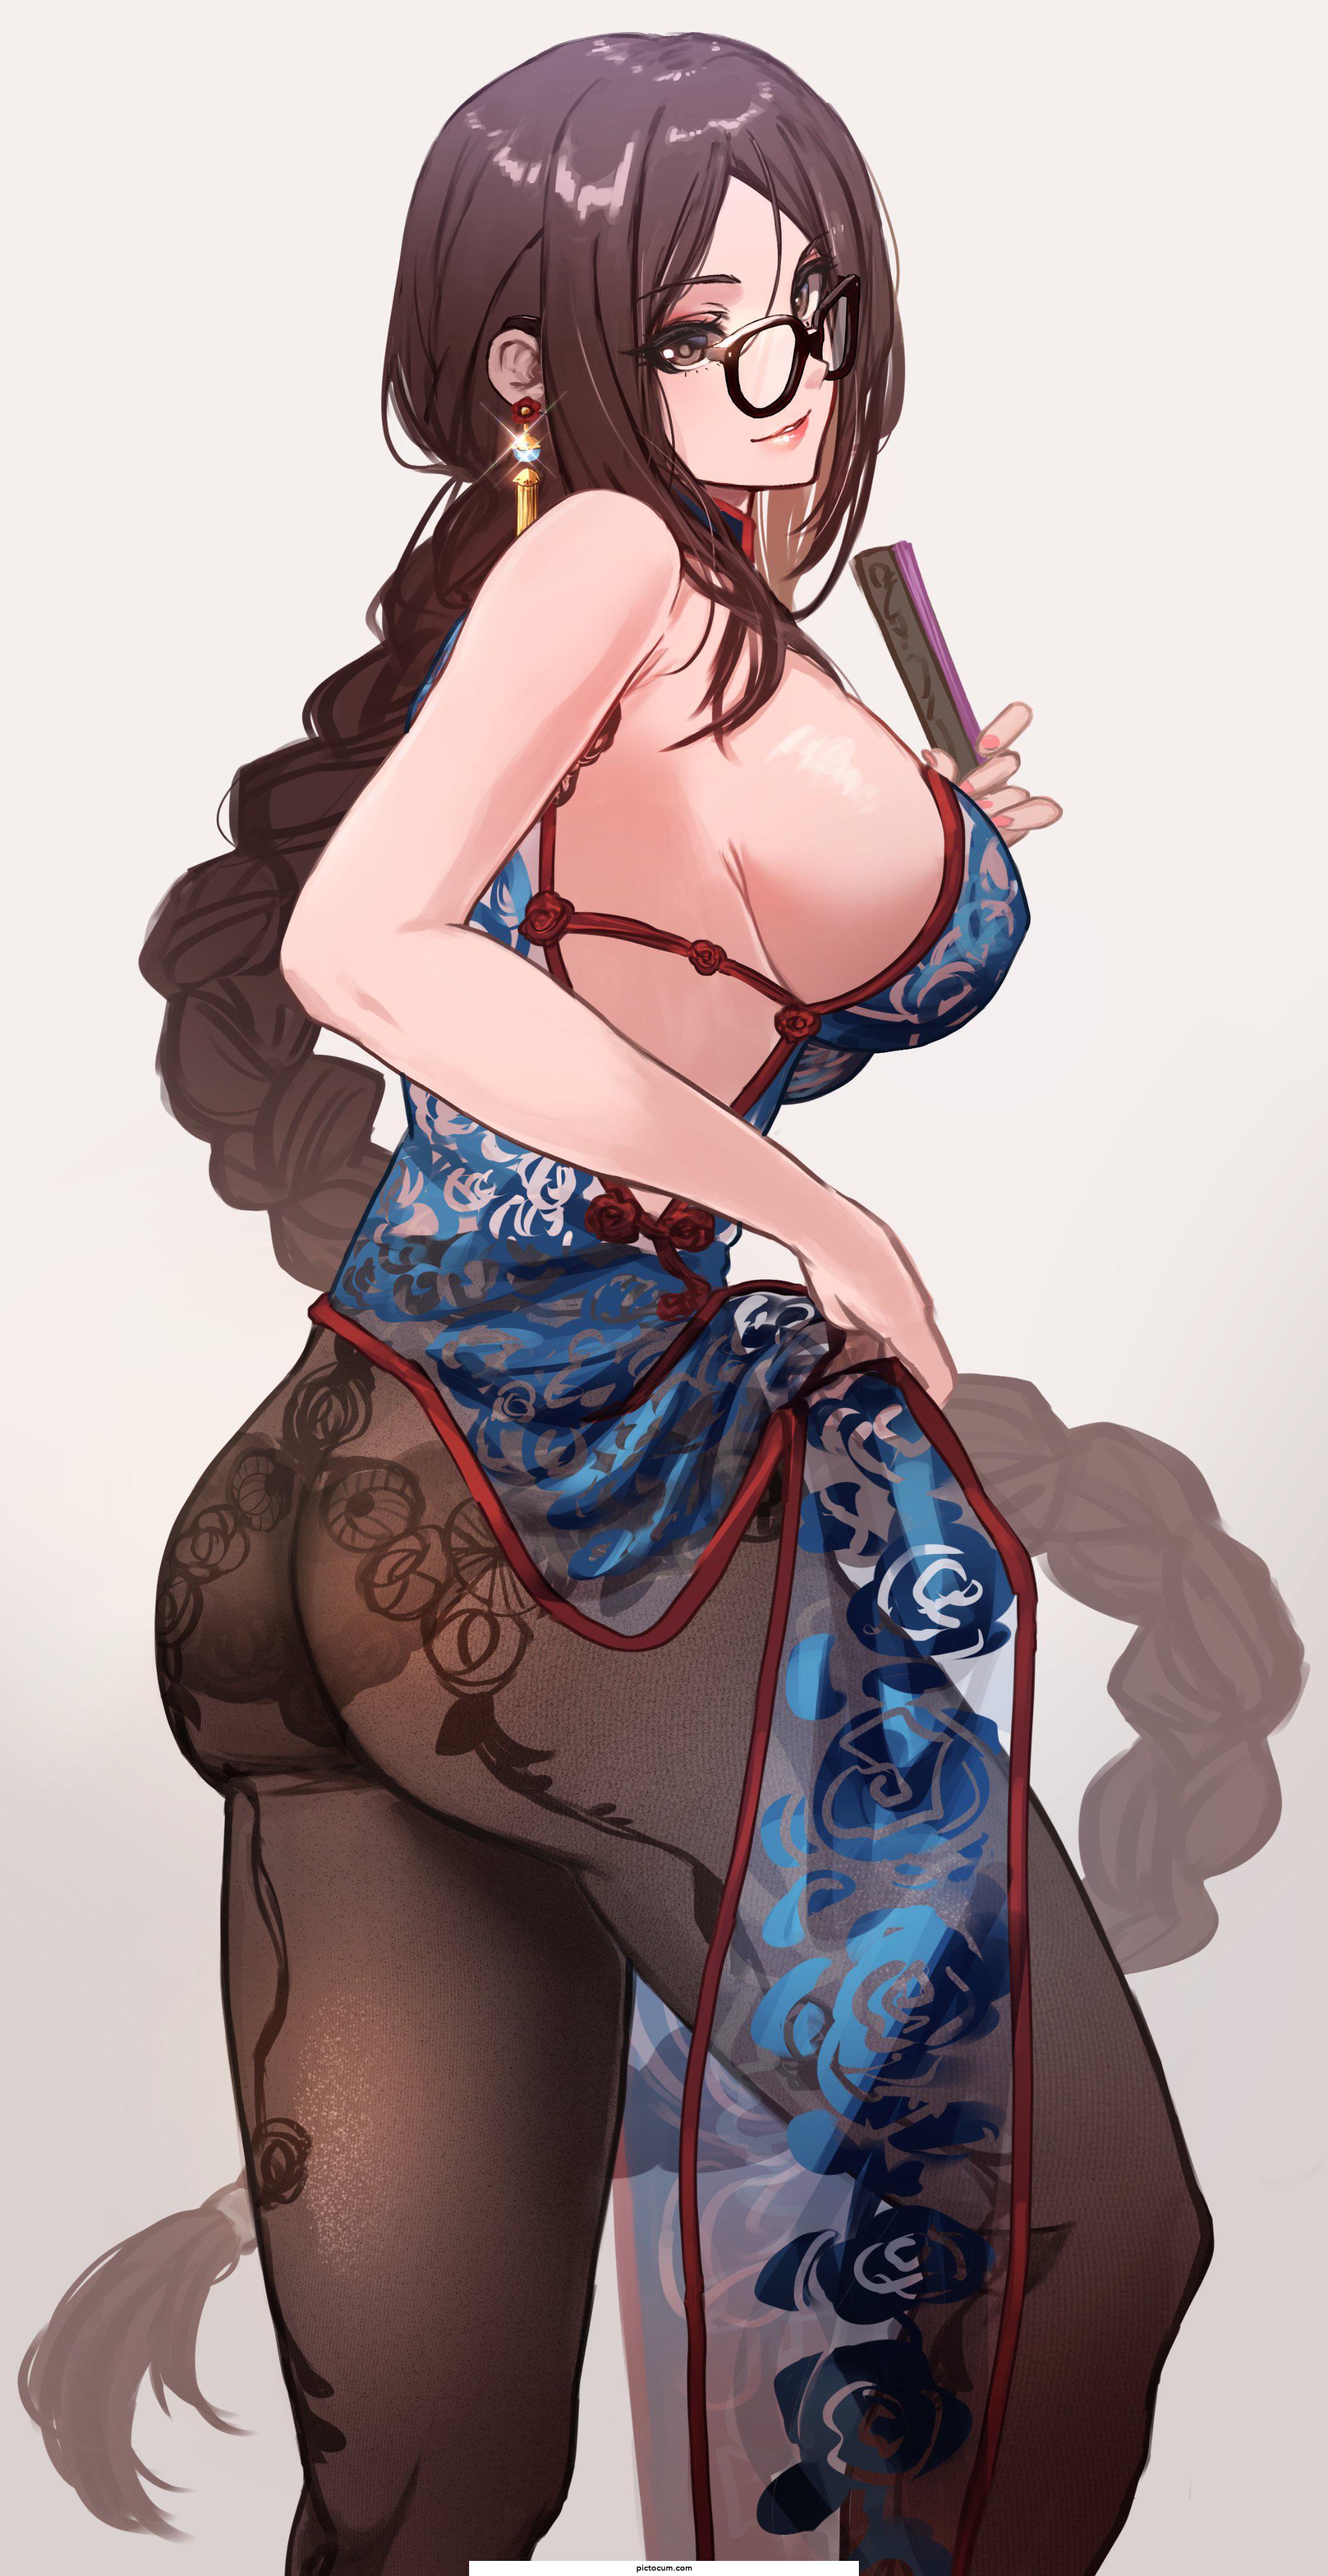 Booty in china dress